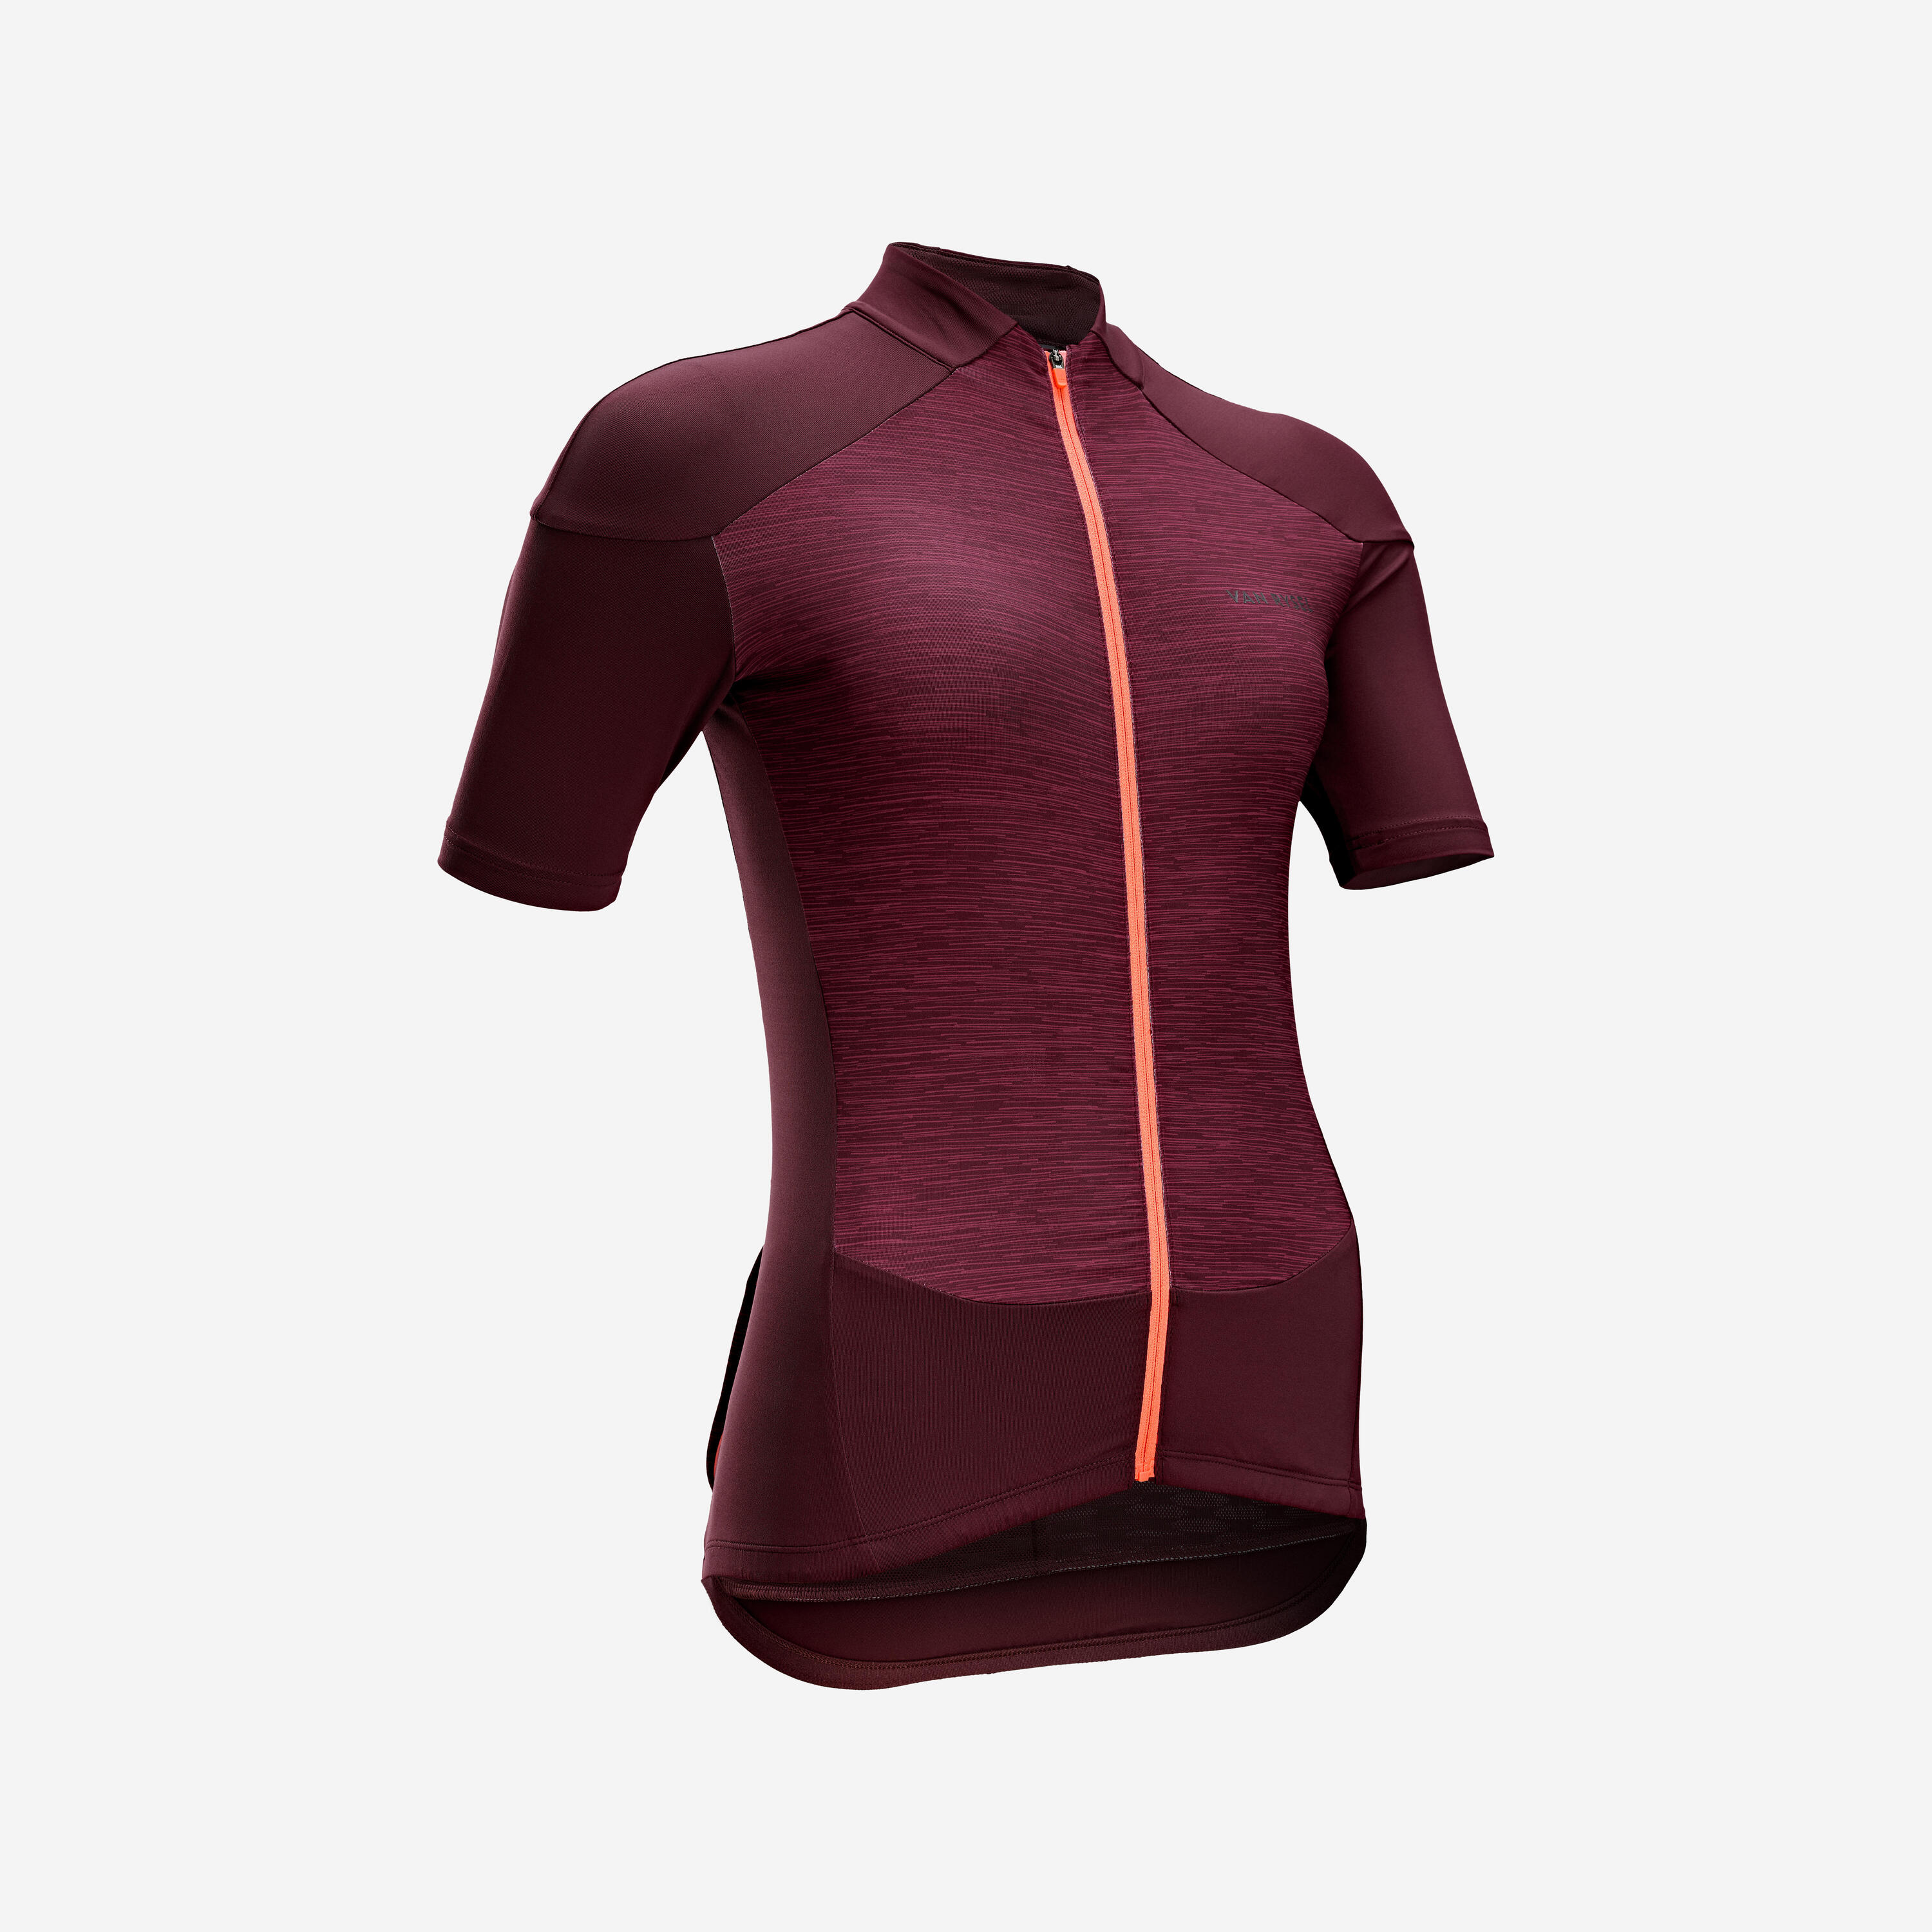 Women's Short-Sleeved Road Cycling Jersey 500 - Burgundy 2/7